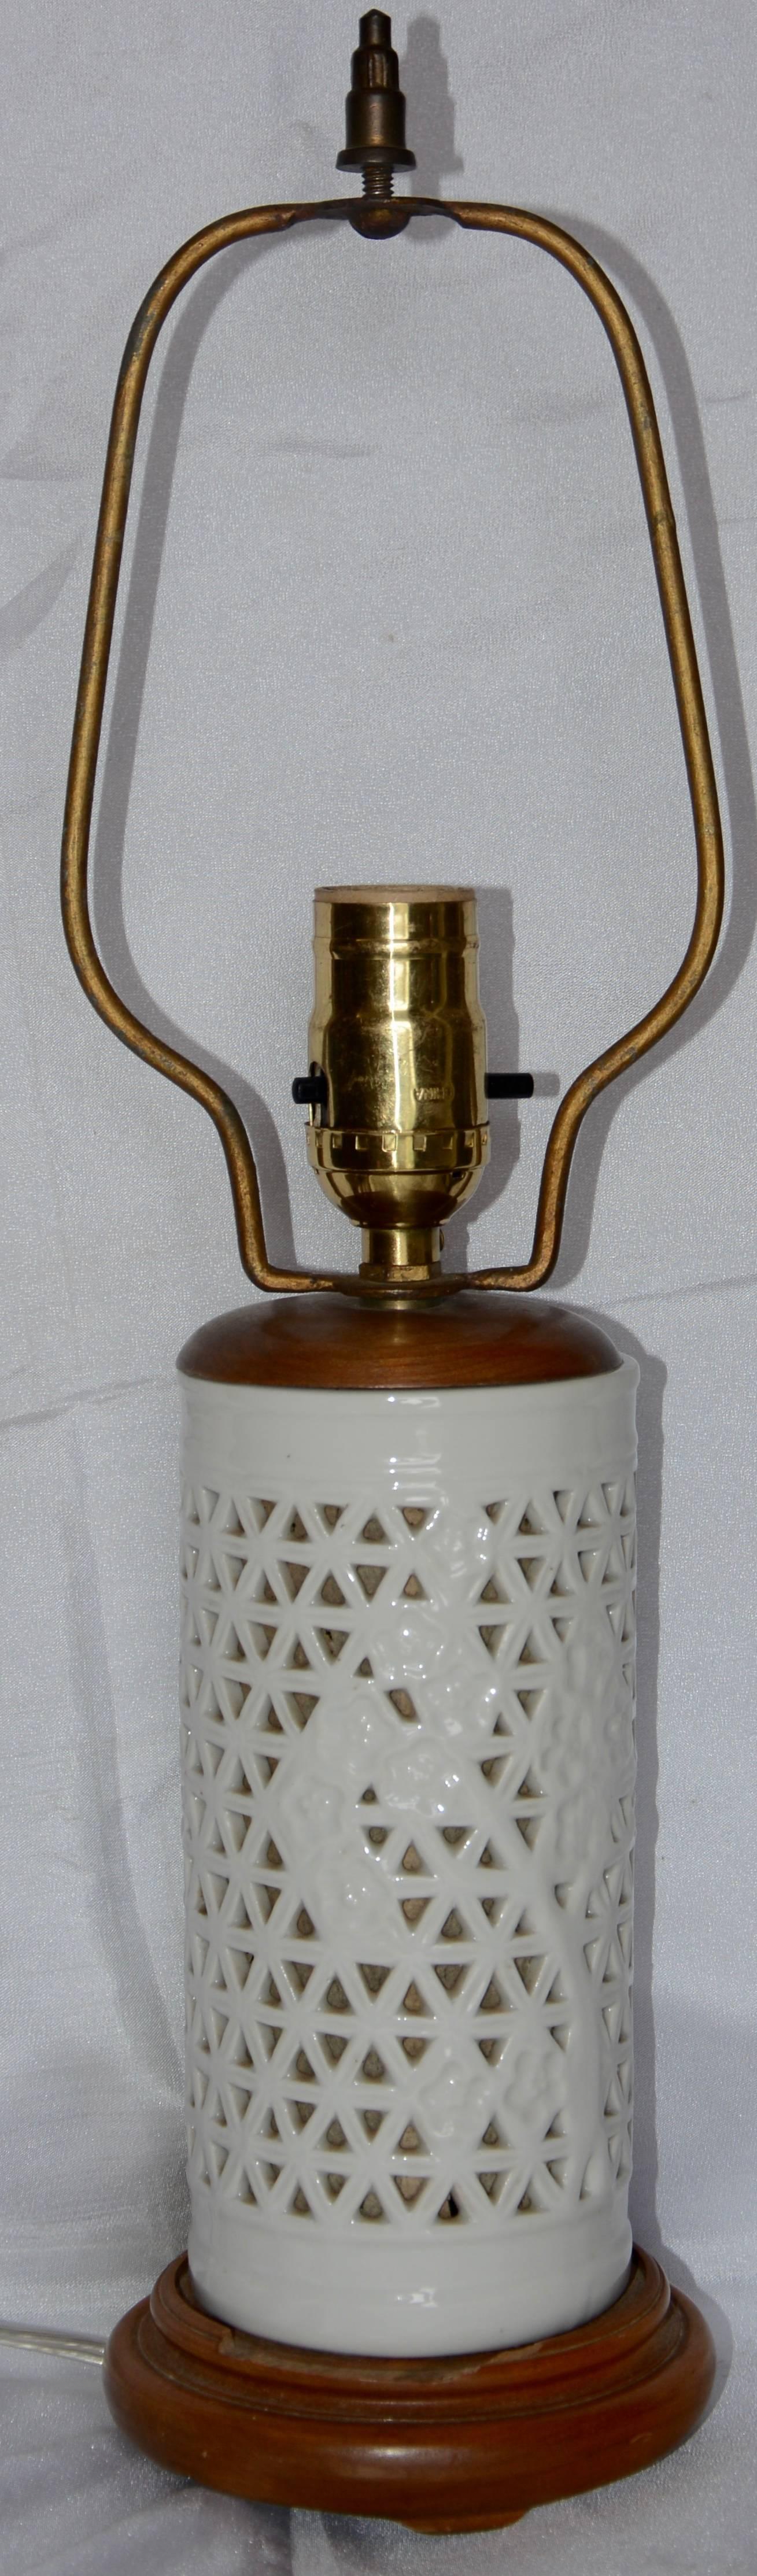 Oriental Ceramic Blanc-de-Chine Lamp Midcentury In Good Condition For Sale In Cookeville, TN